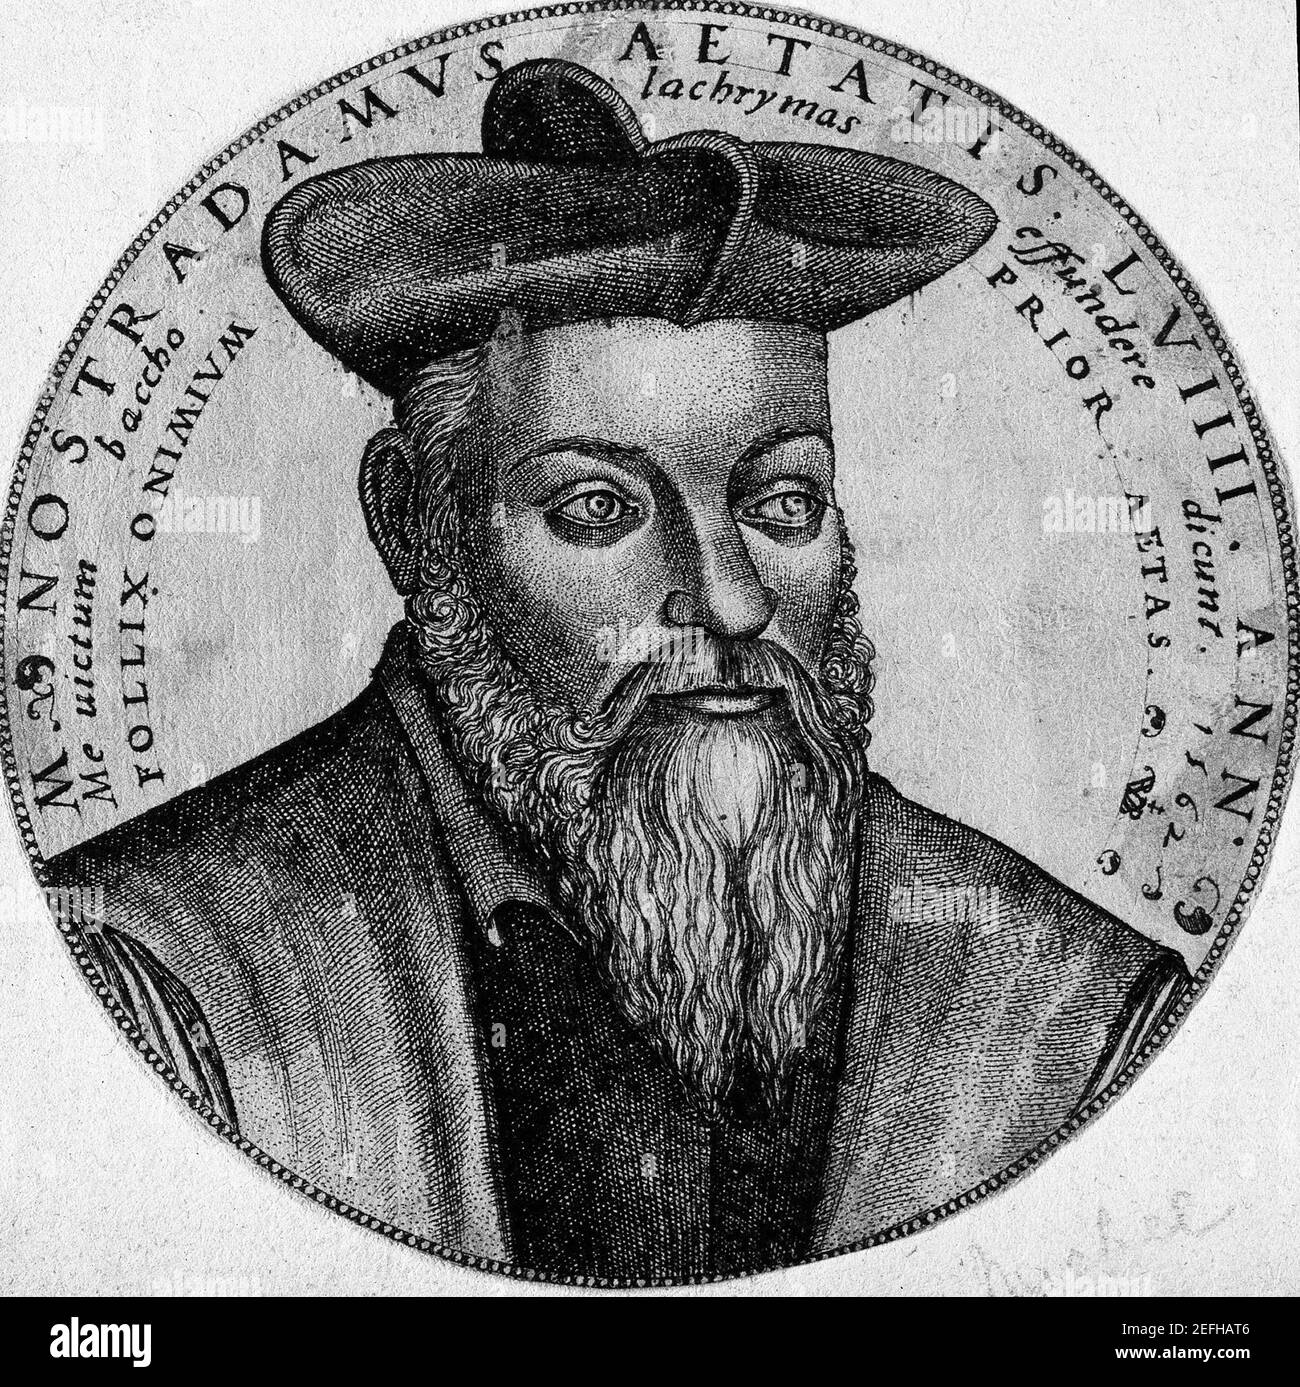 Line engraving of Michael Nostradamus (aka Michel de Nostredame) (born December 14, 1503, Saint-Rémy, France - died July 1/2, 1566, Salon) French astrologer, physician and reputed seer, who is best known for his book Les Prophéties, a collection of 942 poetic quatrains allegedly predicting future events. The book was first published in 1555. Welcome Collection / File Reference # 1003-860THA Stock Photo